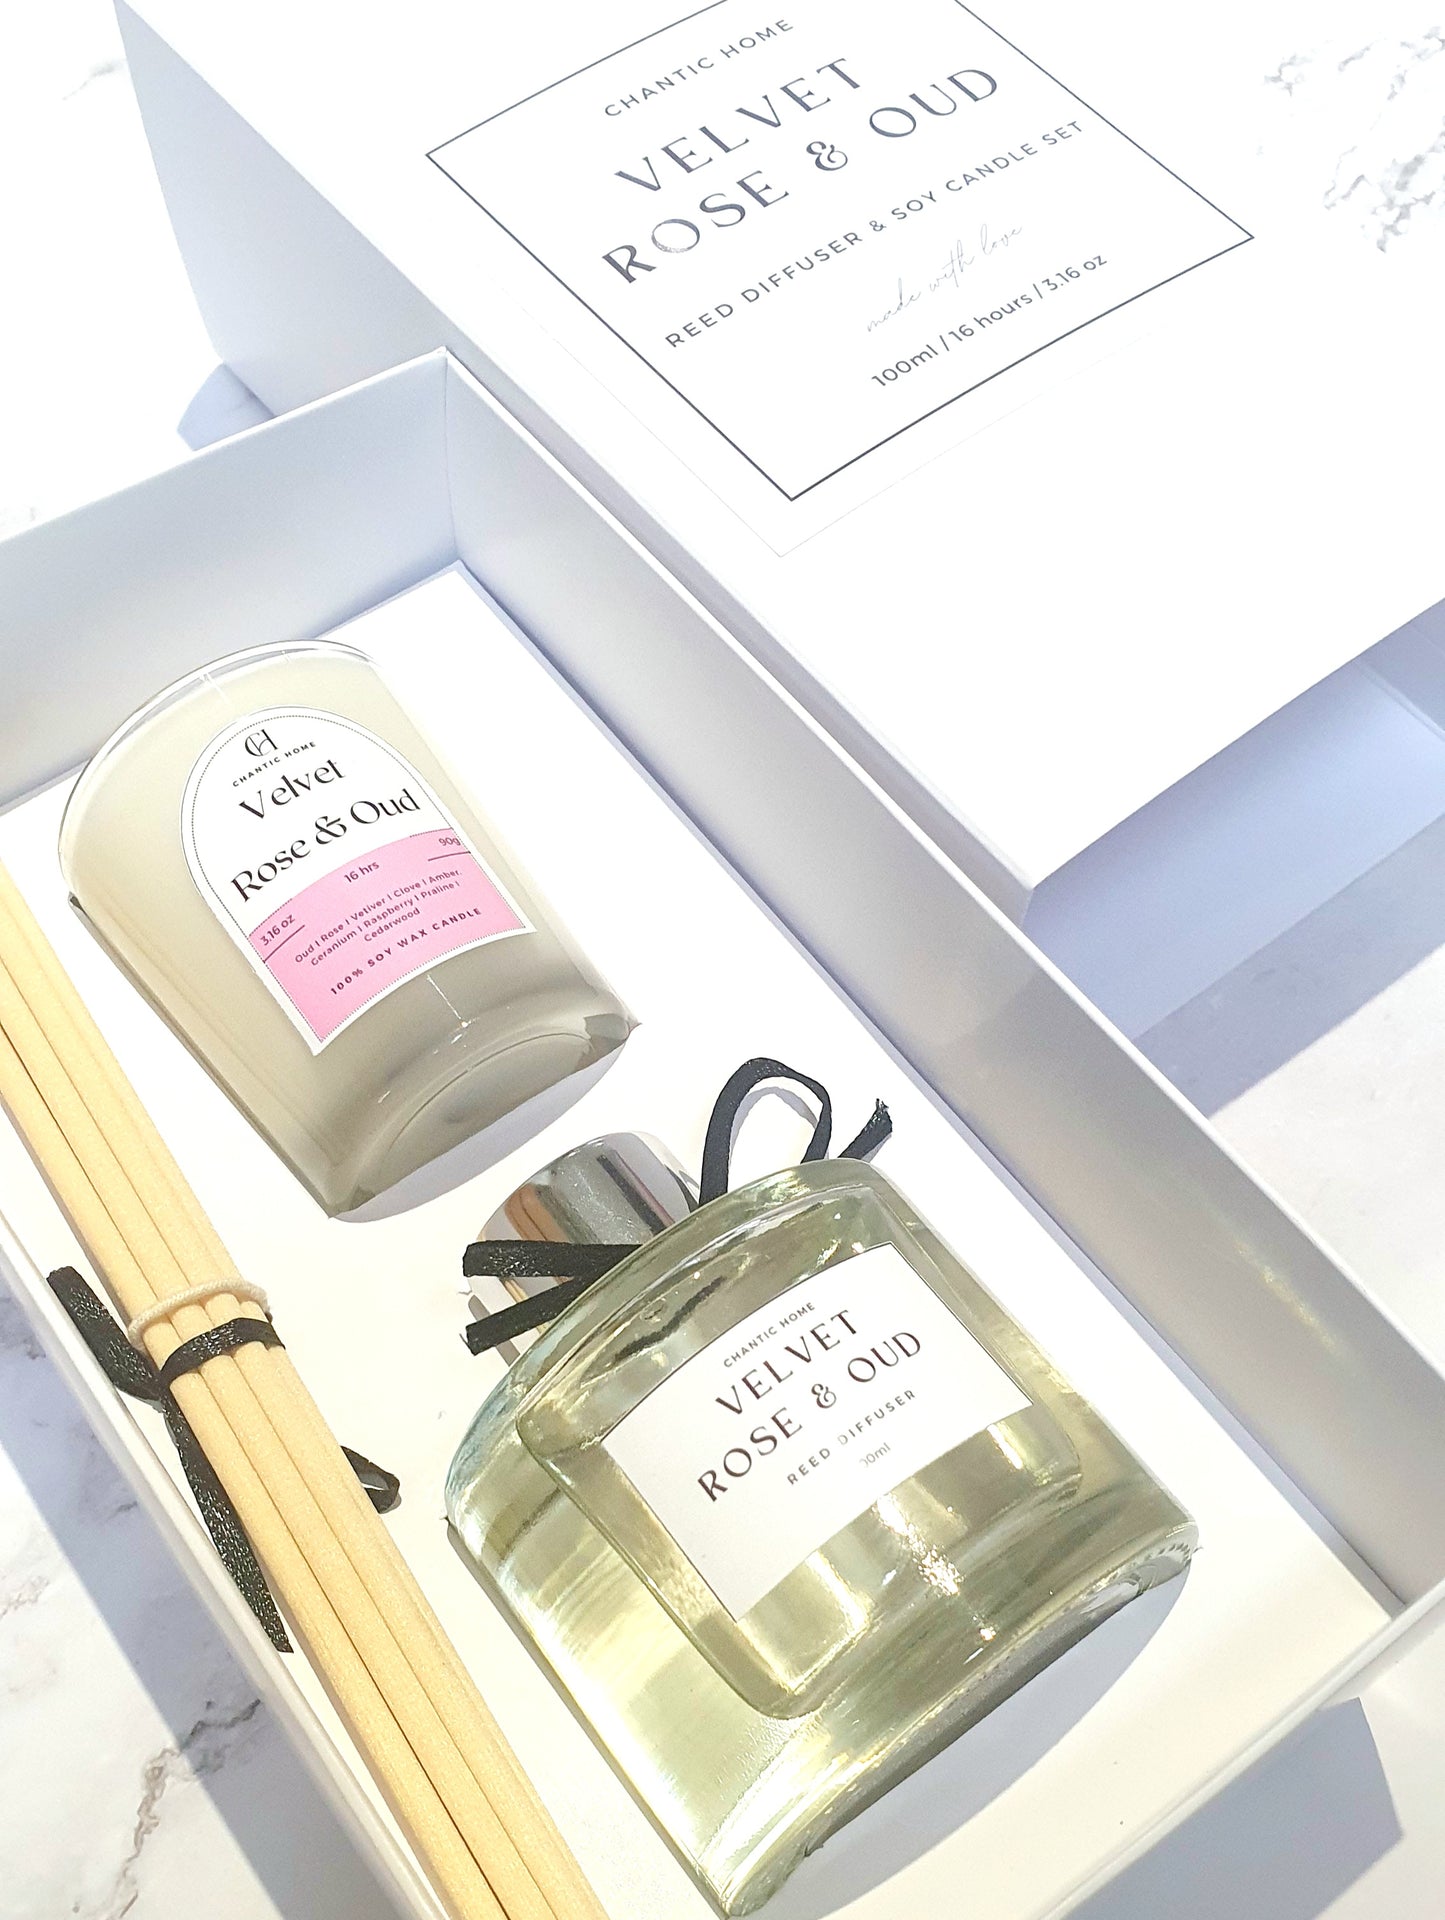 Handmade Diffuser & Candle Gift Set